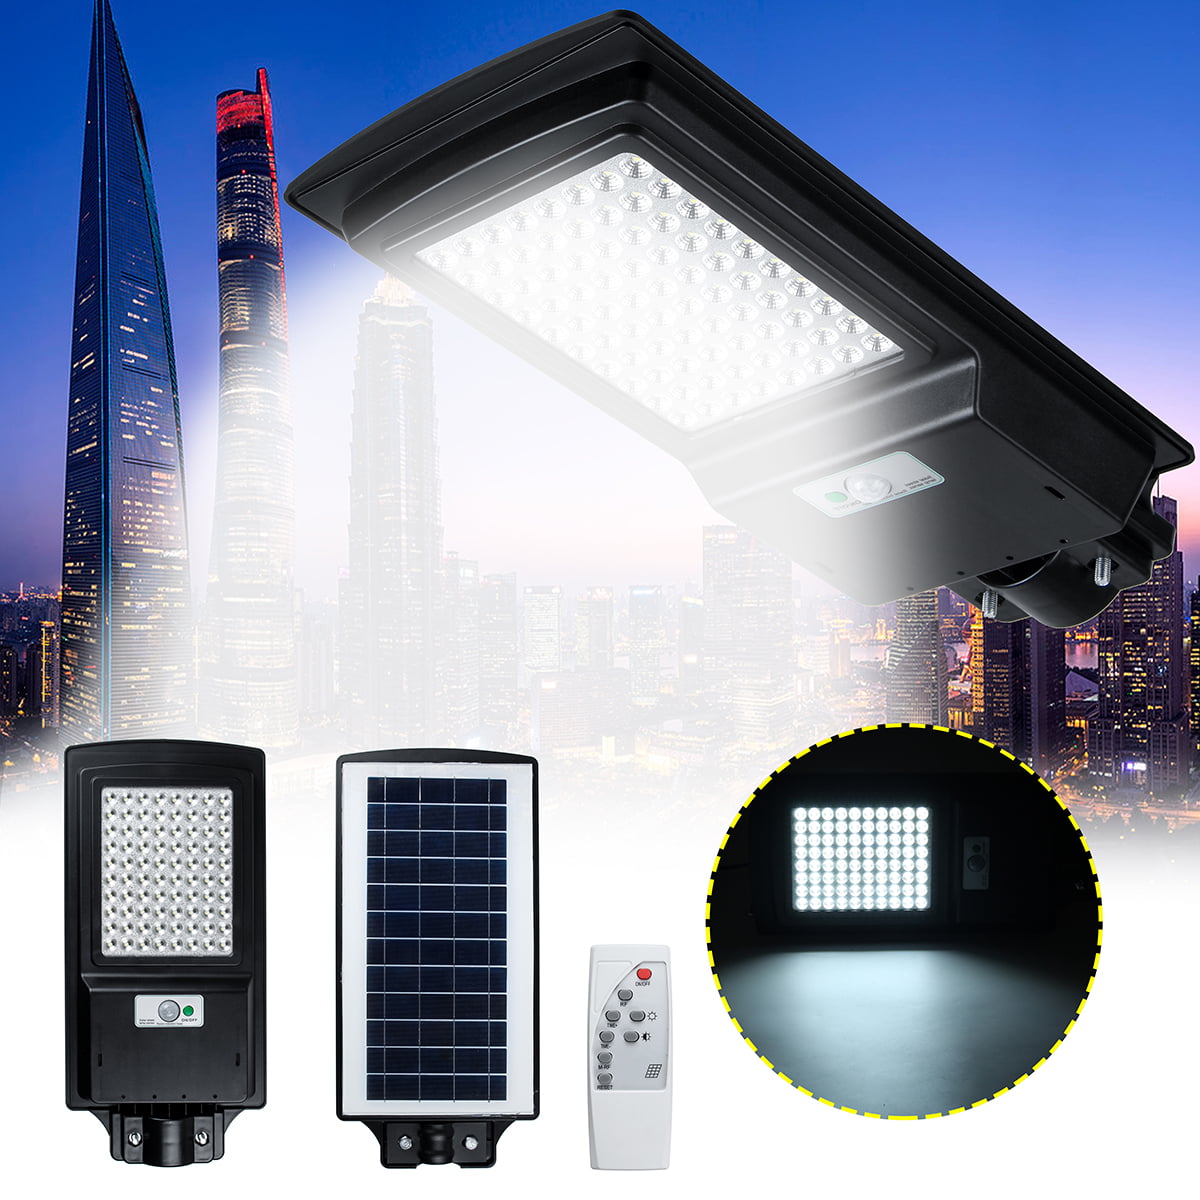 100W 80 LED Wall Street Light Solar Panel Outdoor Garden Lamp+Remote Control